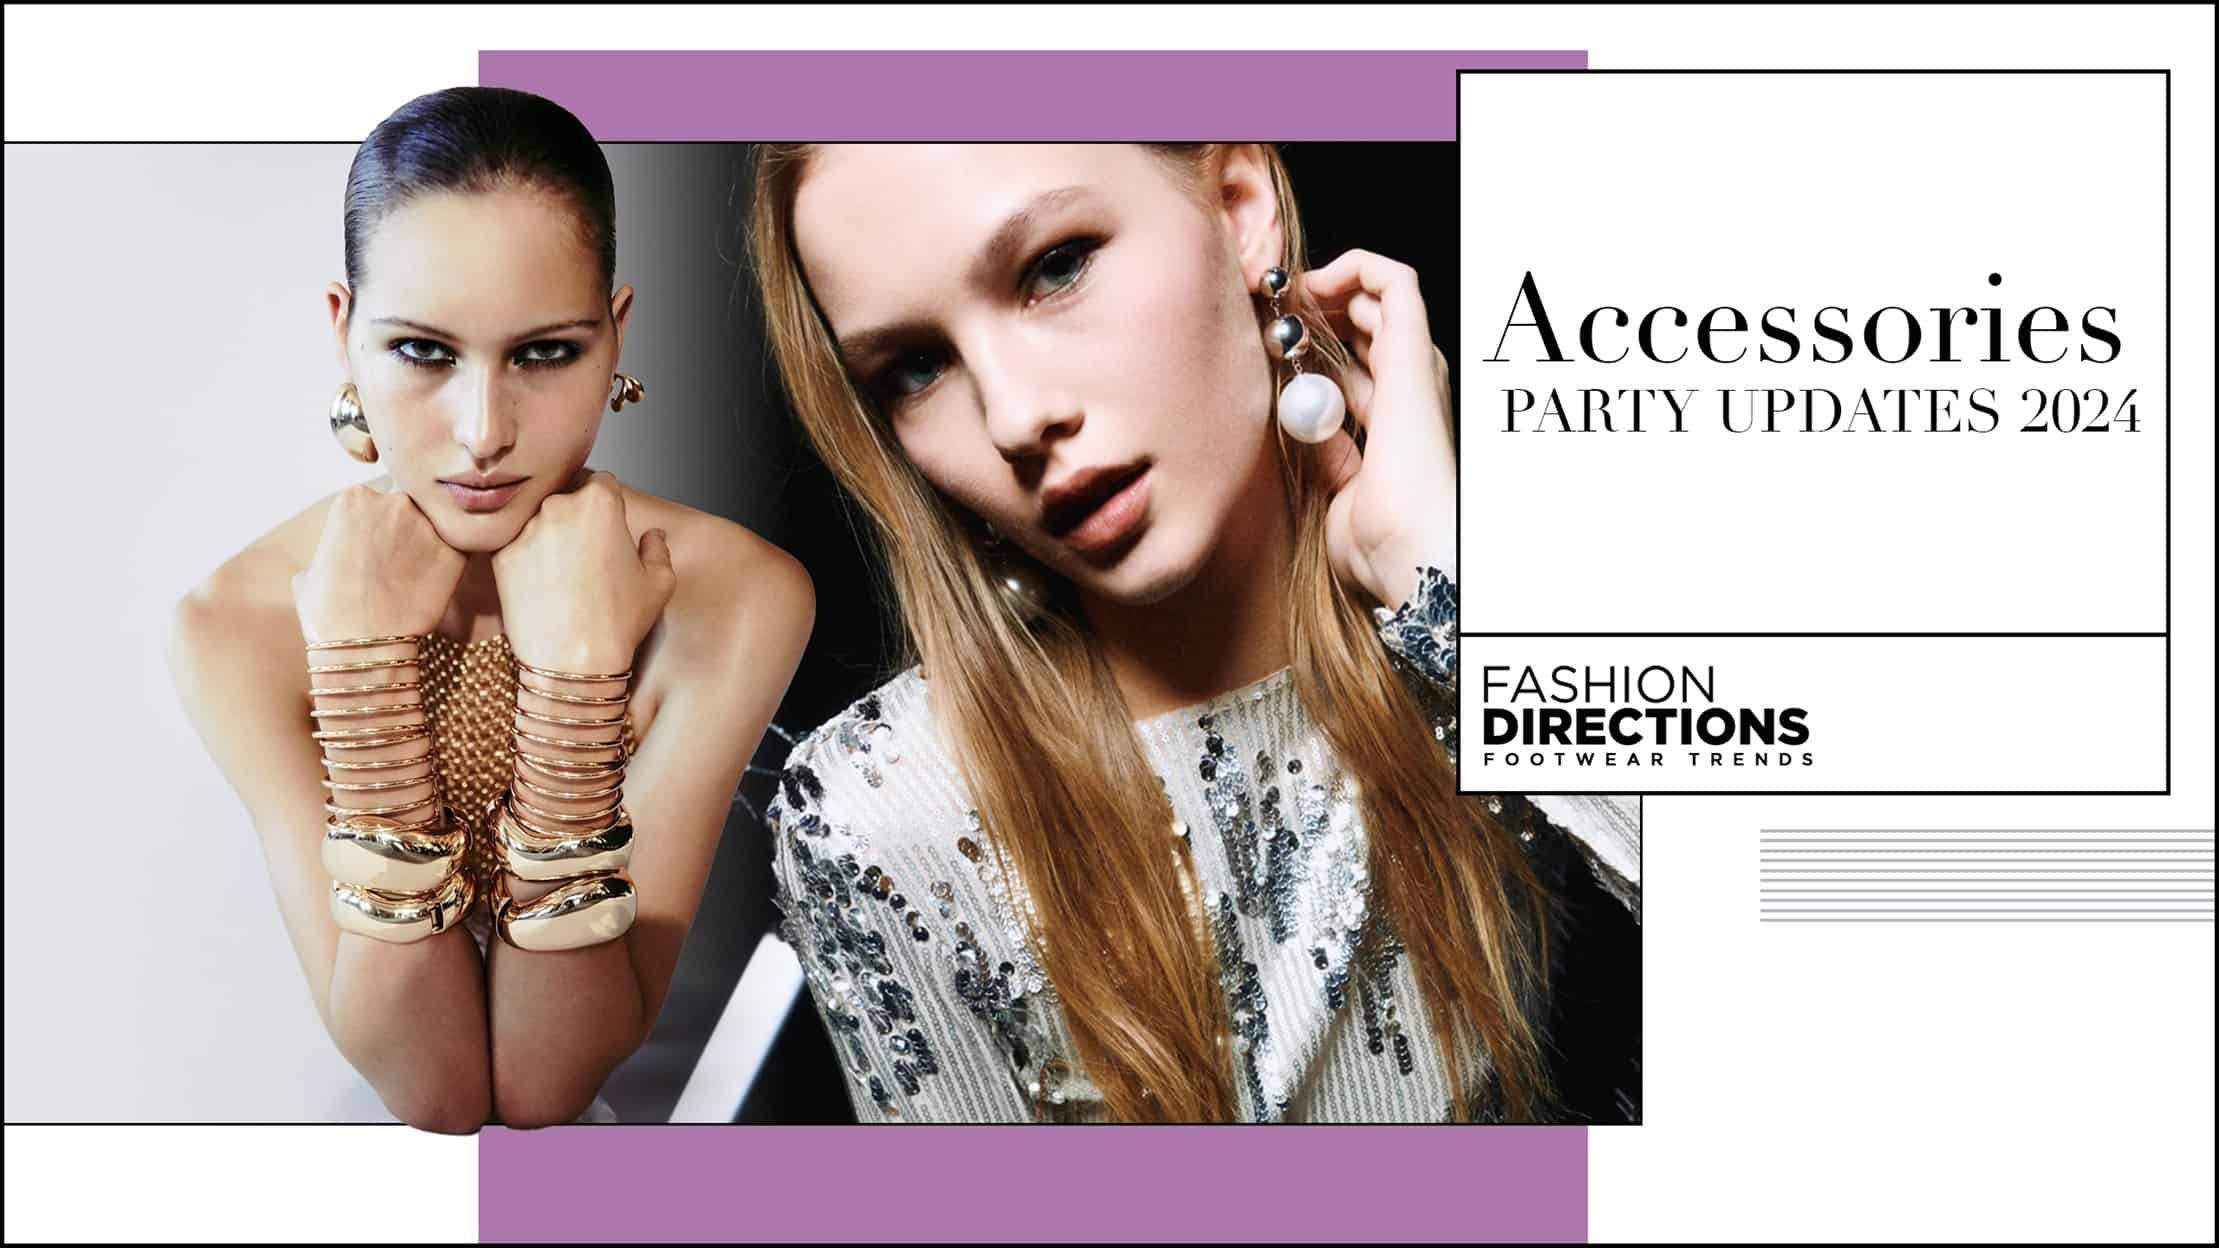 ACCESSORIES PARTY UPDATES 2024 1